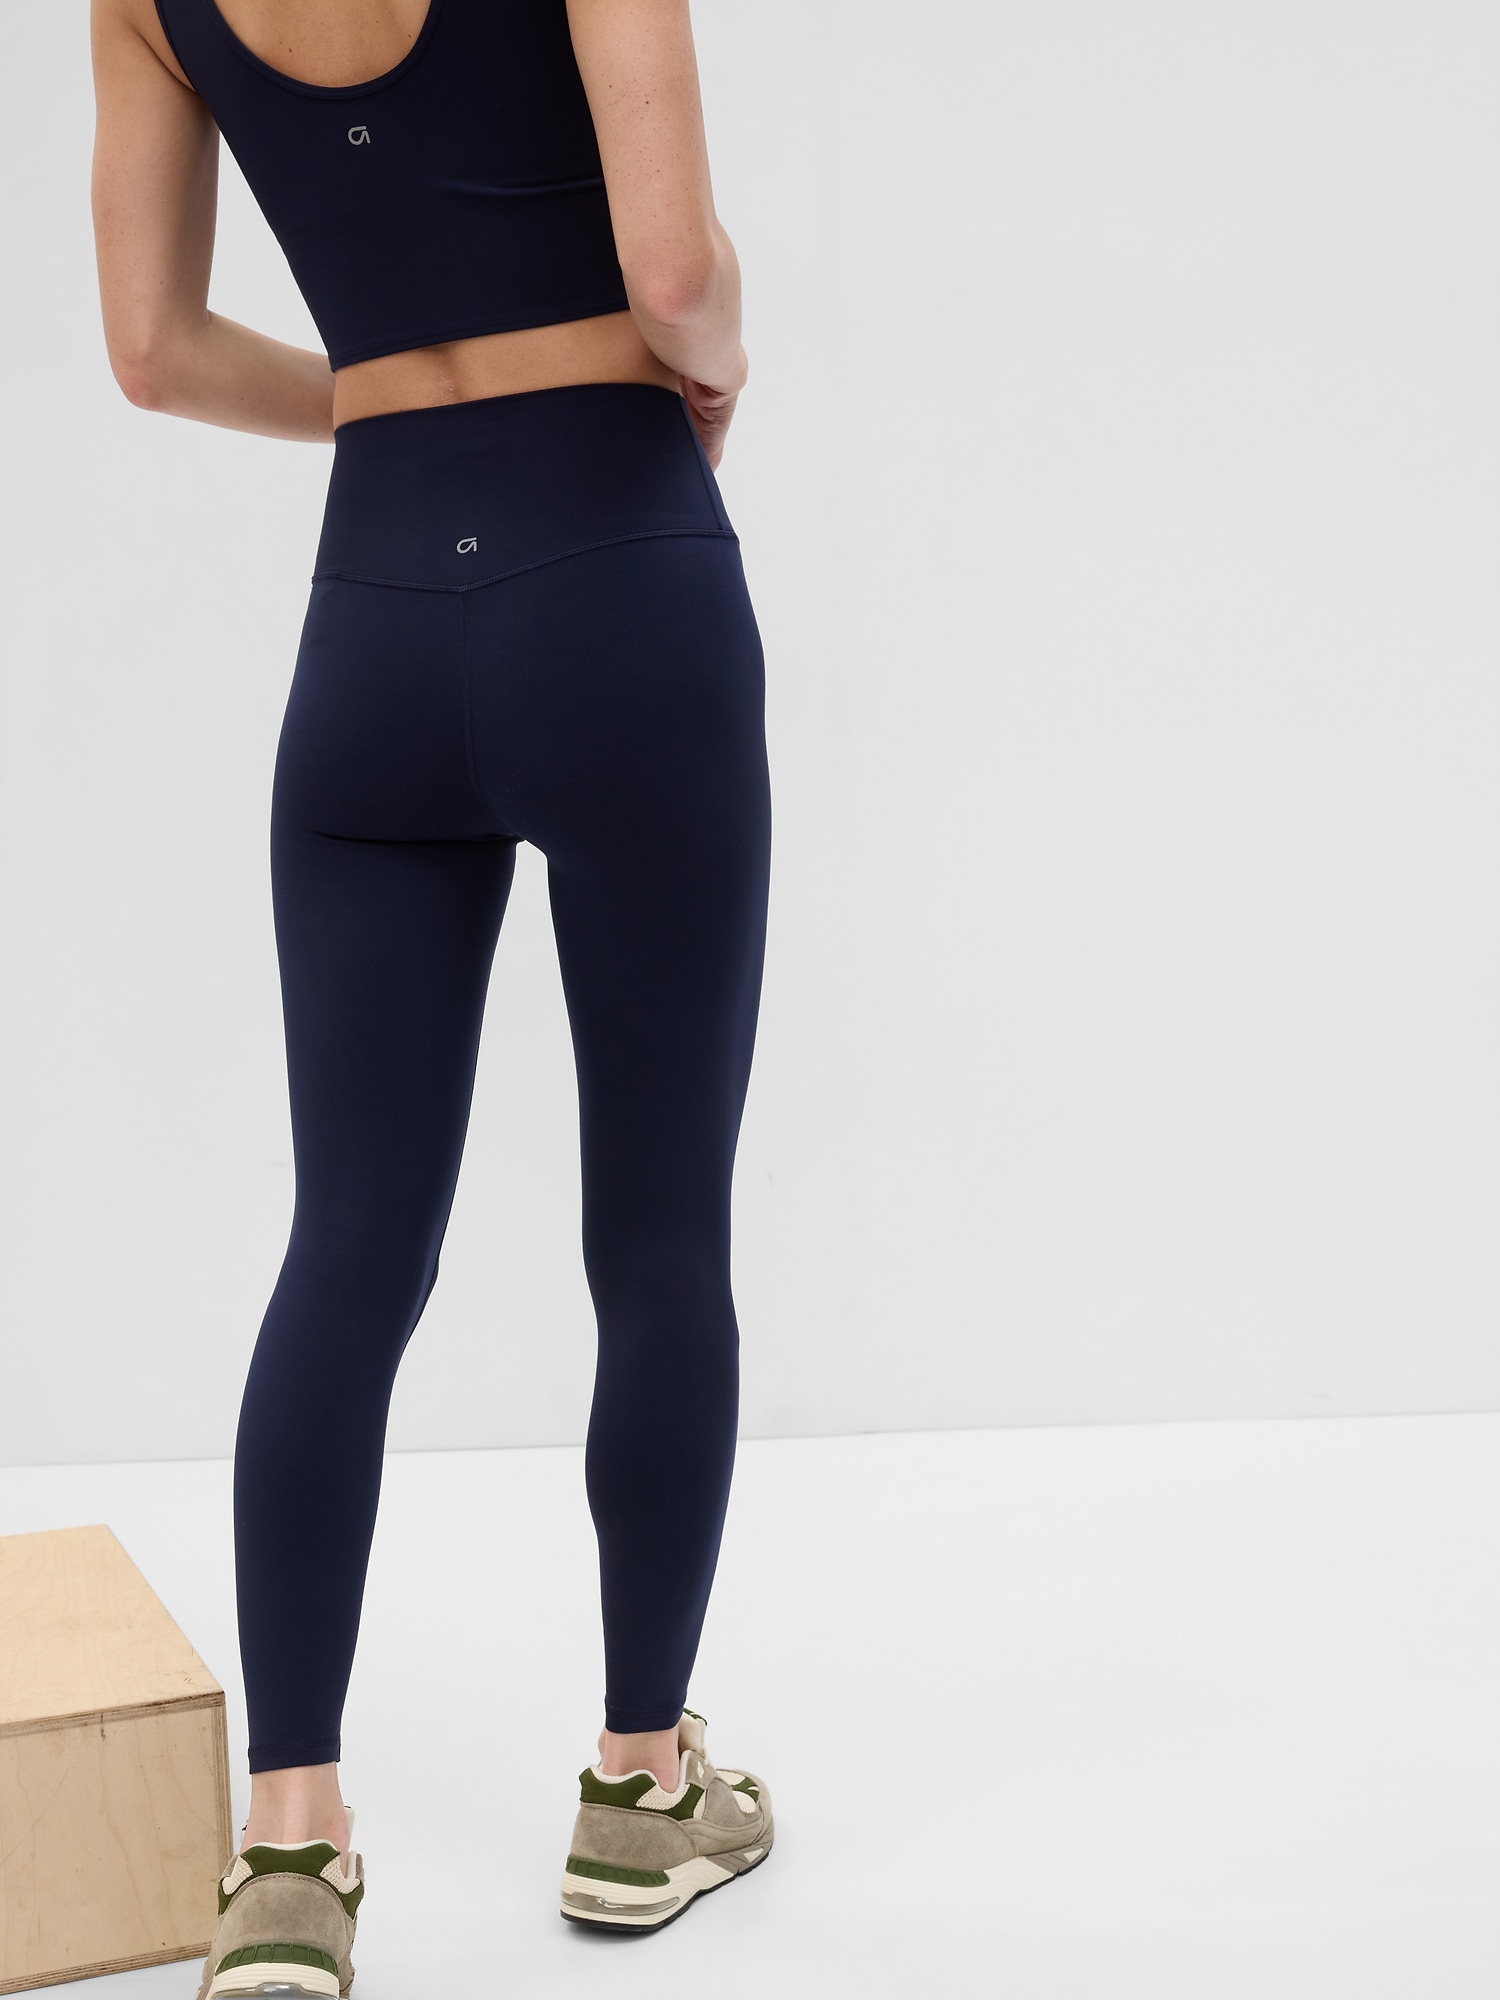 Gap GapFit High-Rise 7/8 Leggings in Eclipse, We Compared 12 Gap Leggings  So You Can See Beyond Their Looks